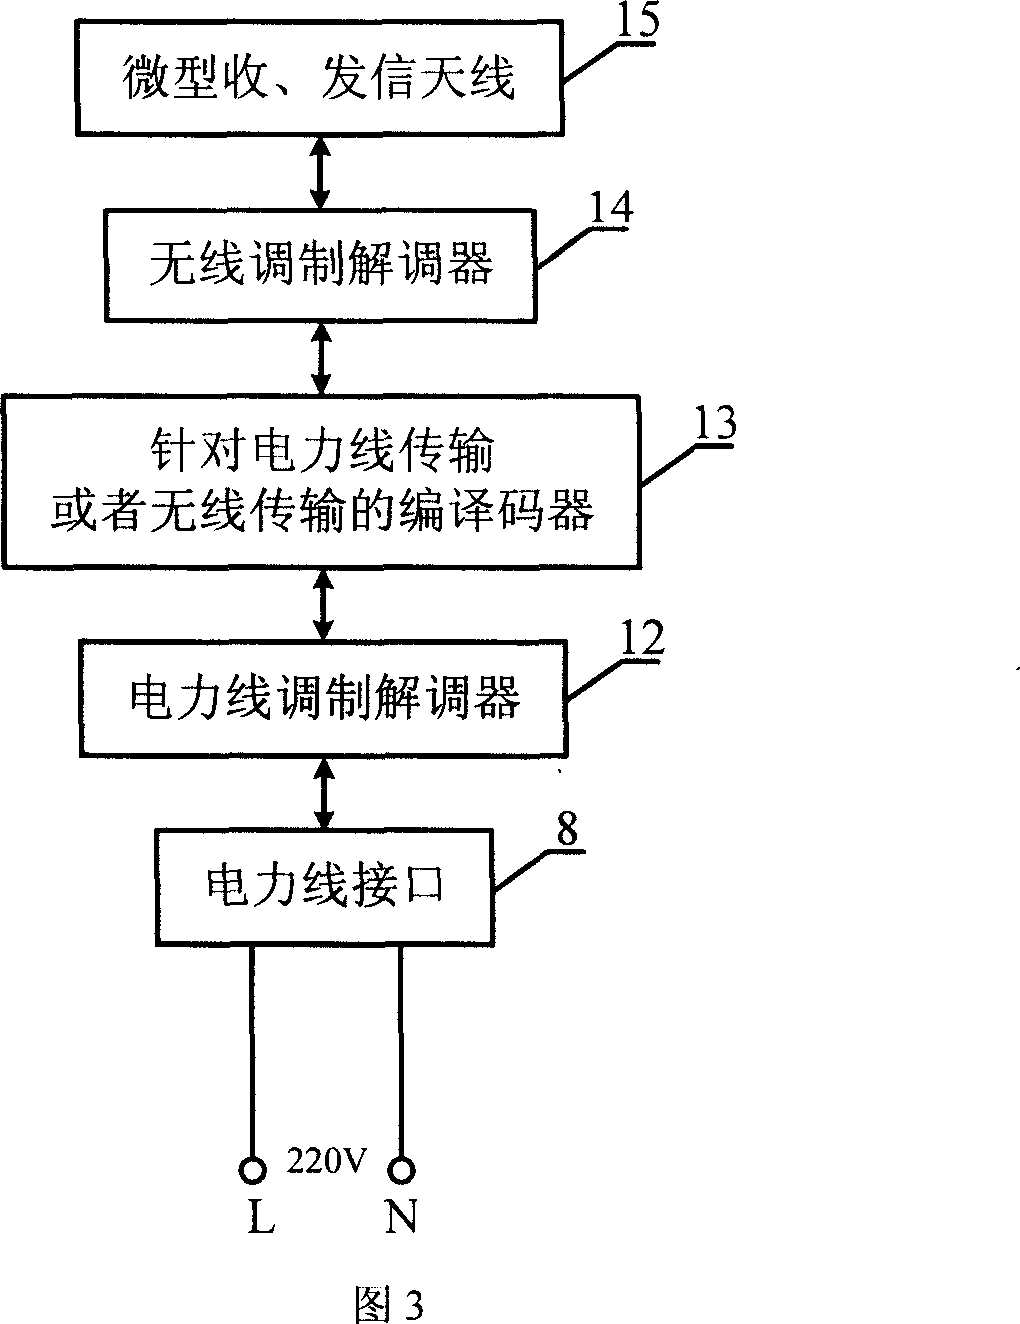 Distributed multi-input multi-output public mobile communication system based on electric line